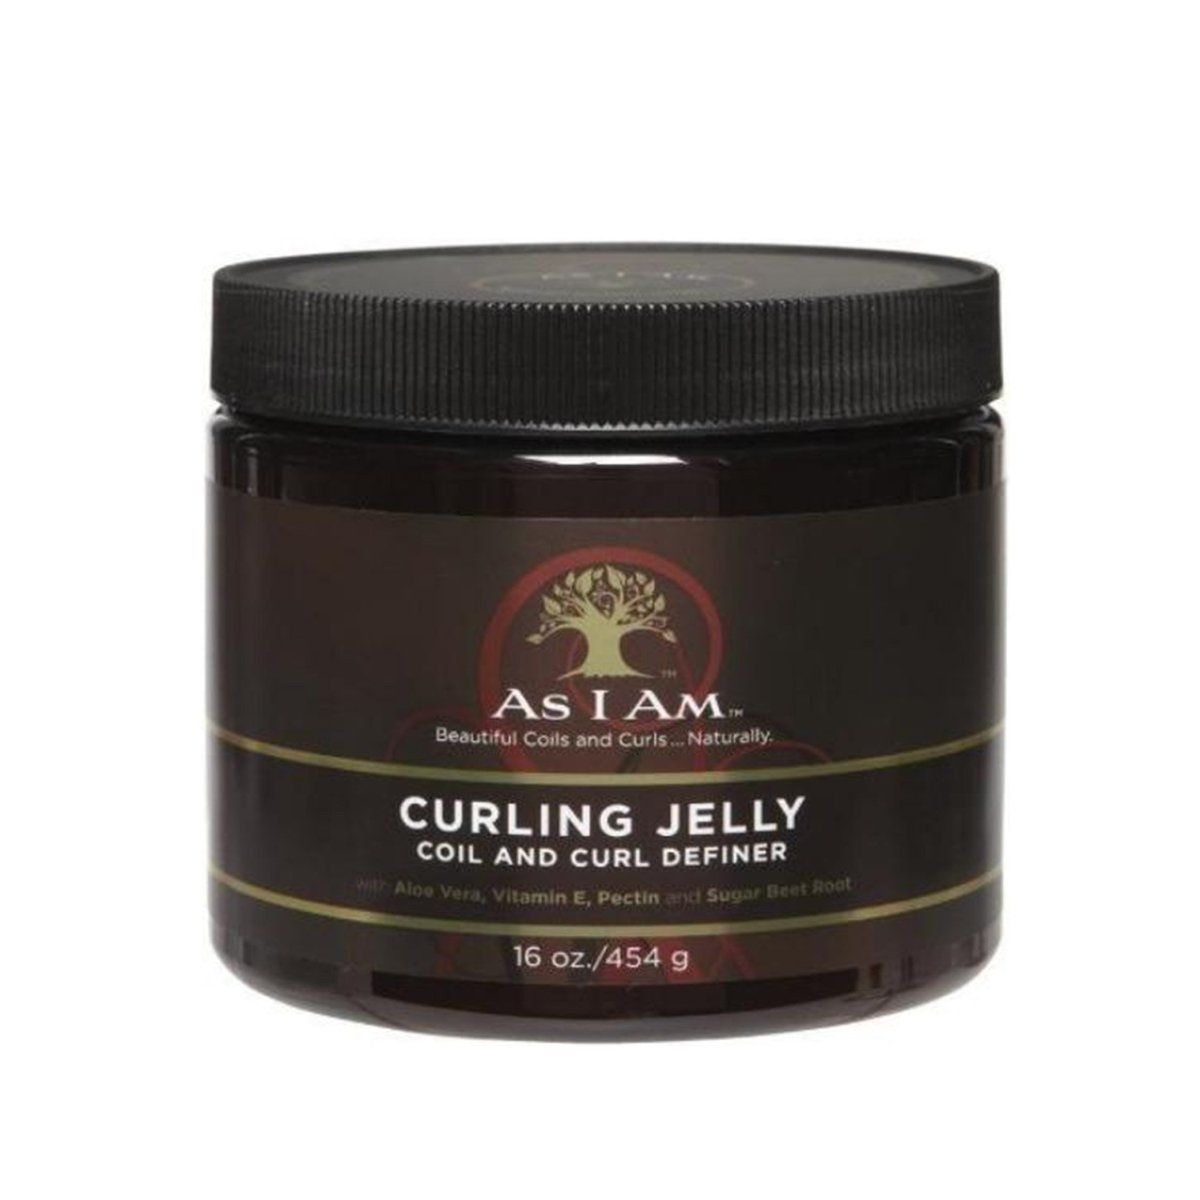 As I am Curling Jelly 16oz